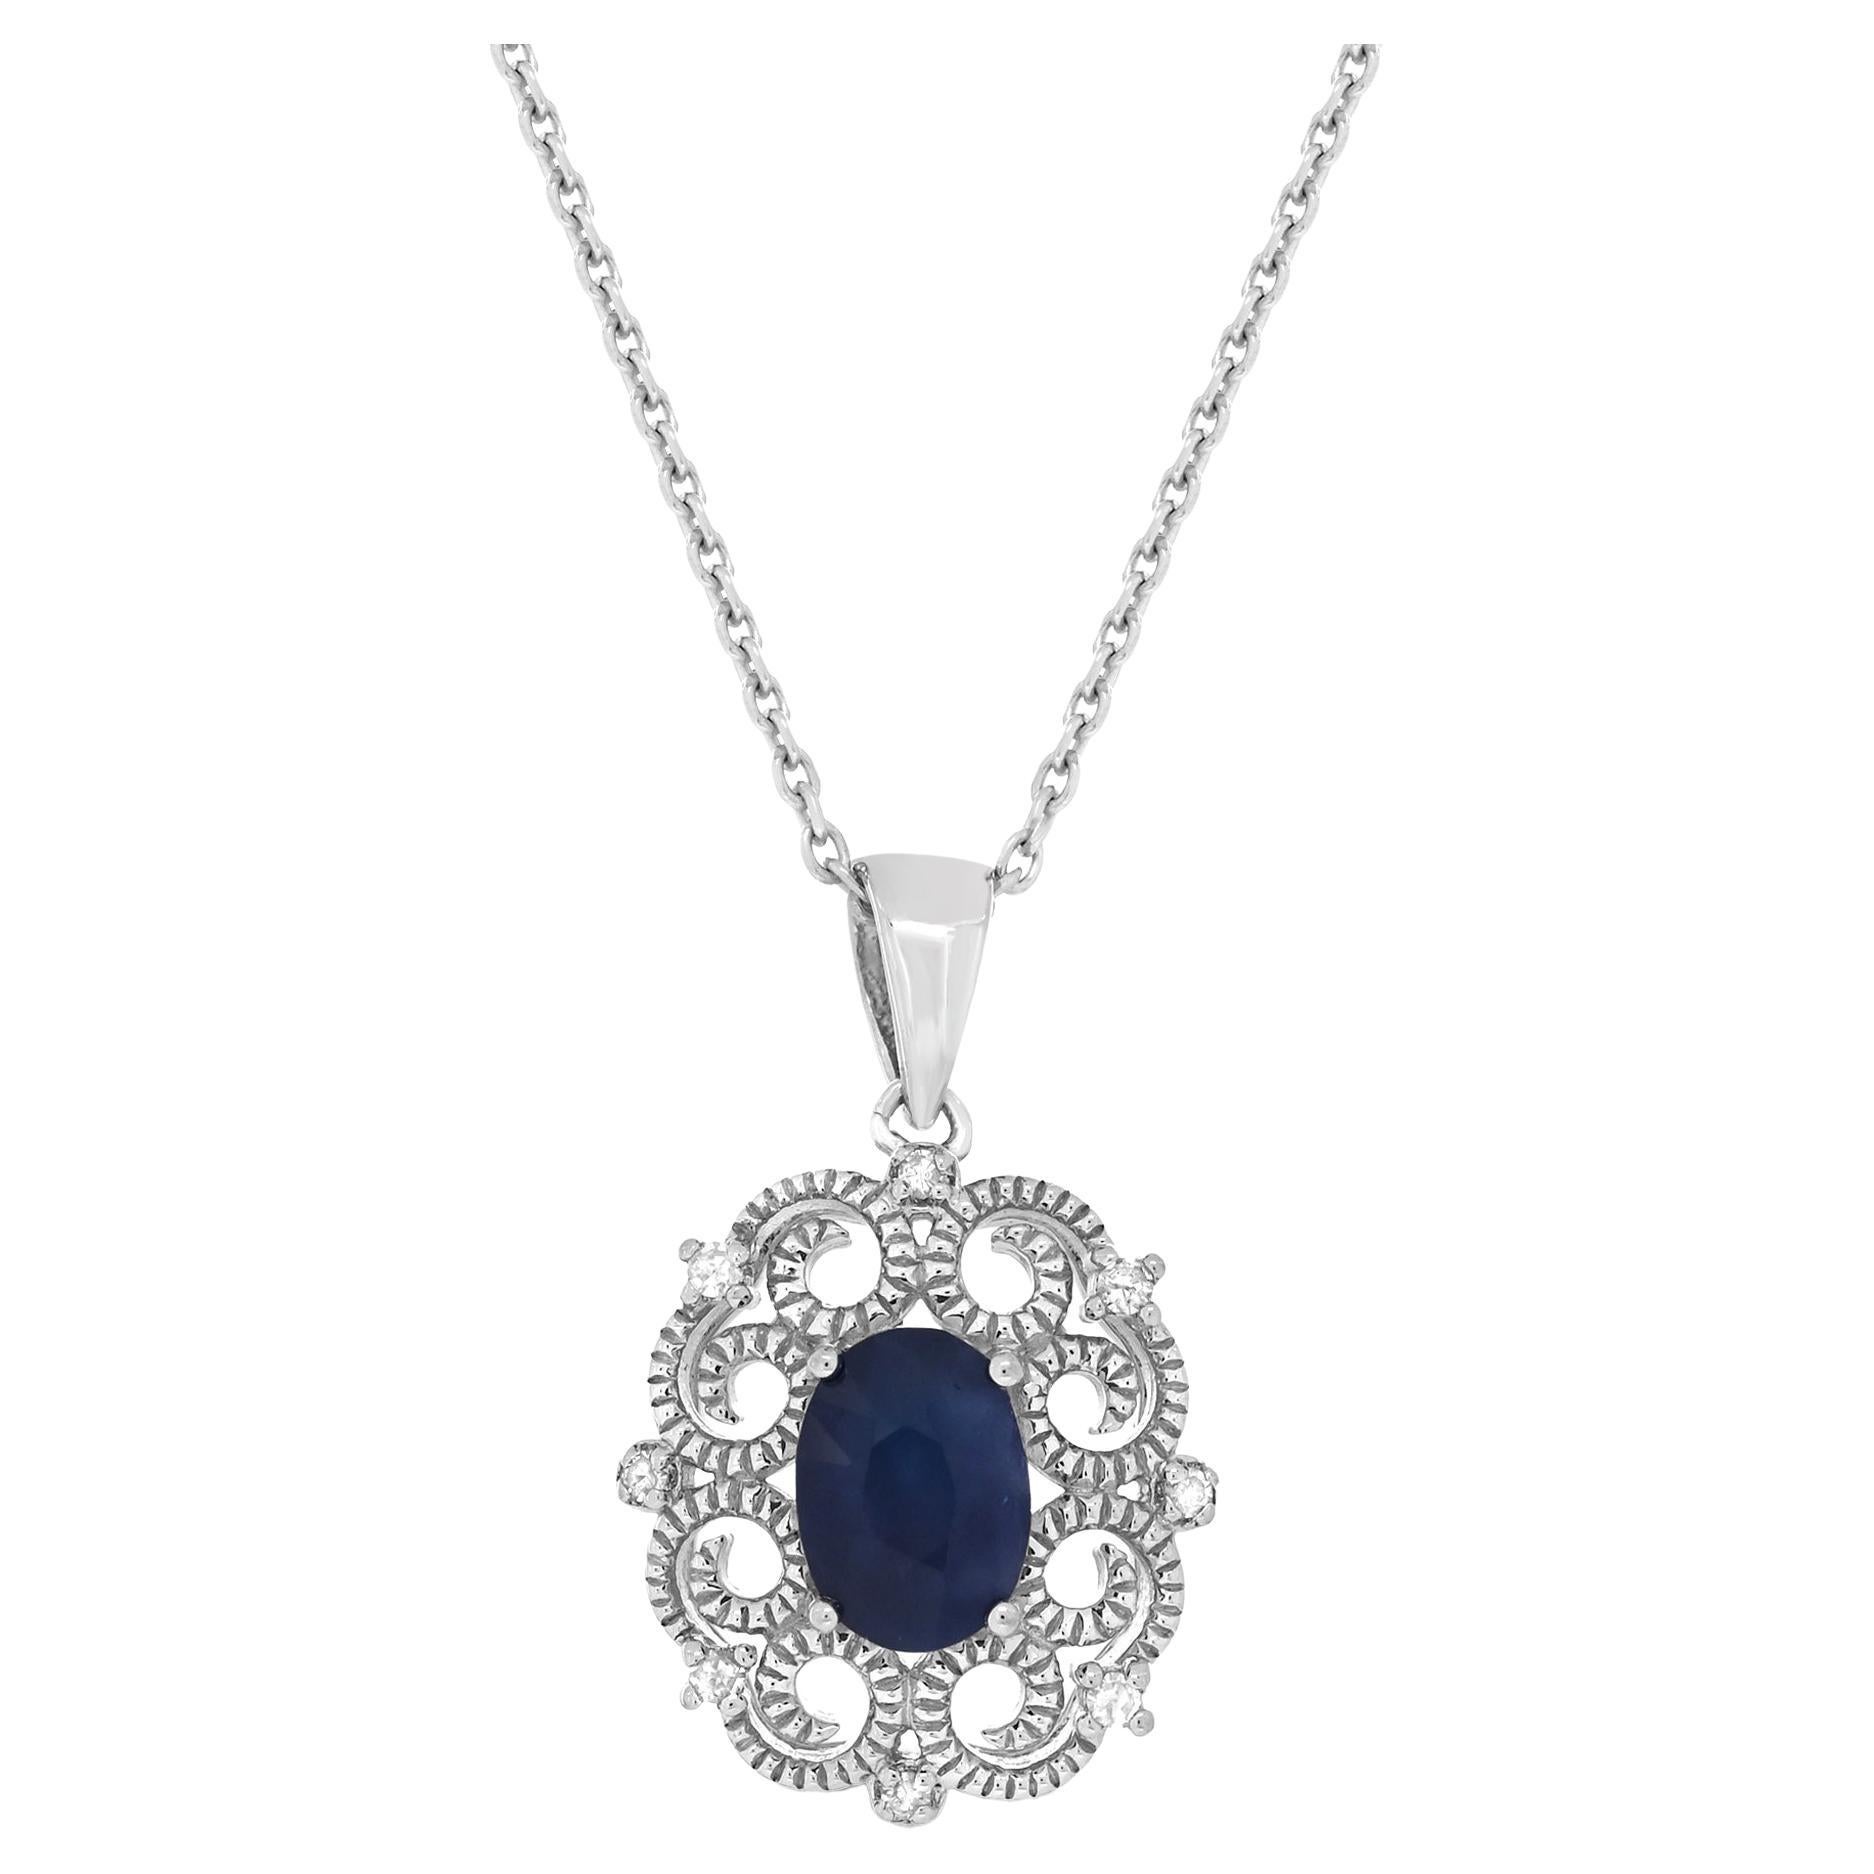 1-1/20 ct. Oval Sapphire and Diamond Accent Sterling Silver Pendant Necklace